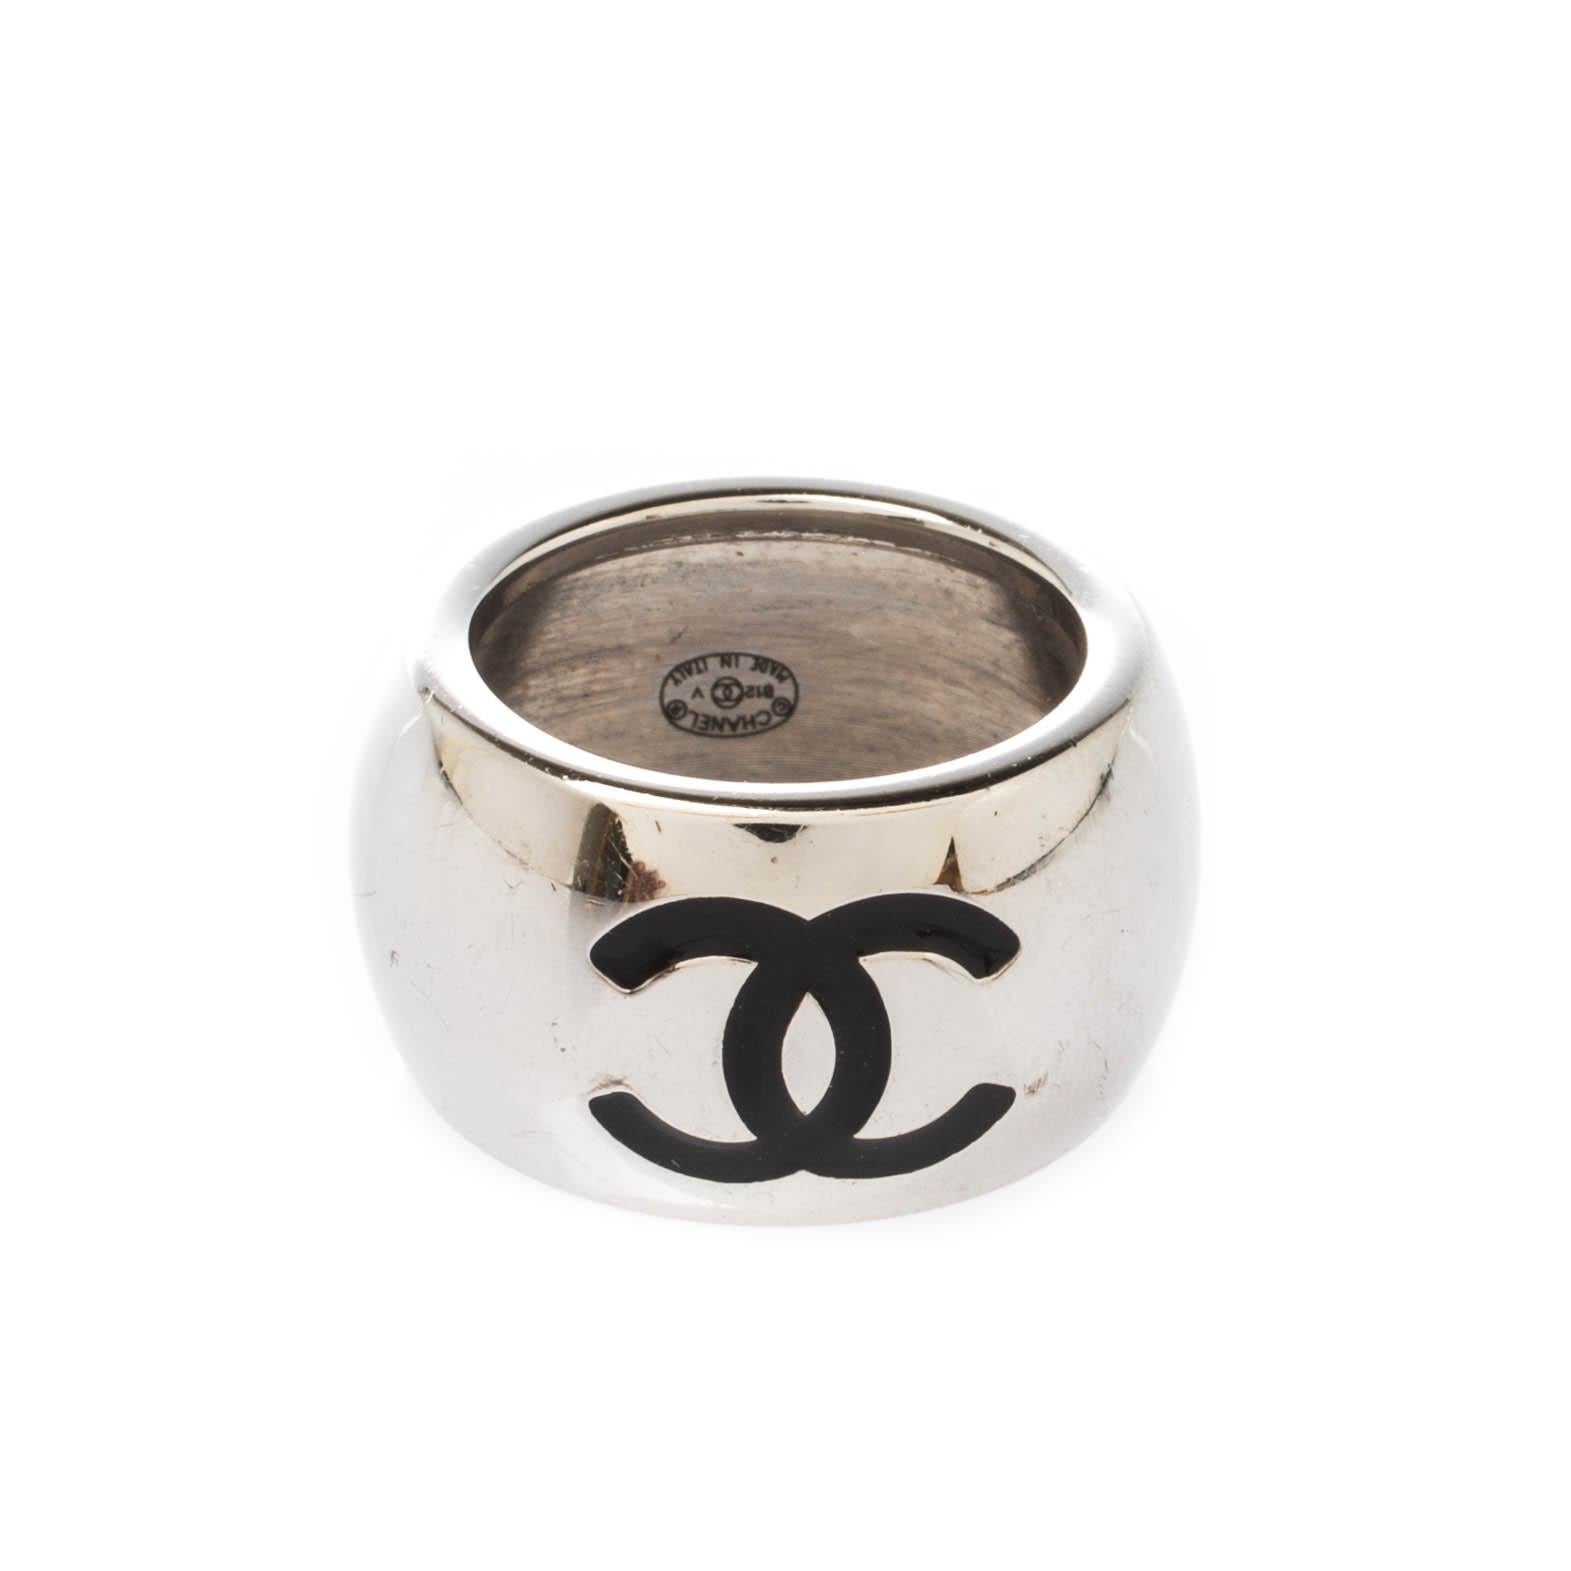 Beautifully sculpted from silver-tone metal, this Chanel piece is bent into a smooth wide band. It has smooth lines and curves with a resin heart detail and the CC logos for a signature touch. It can be worn solo with casual outfits.

Includes: